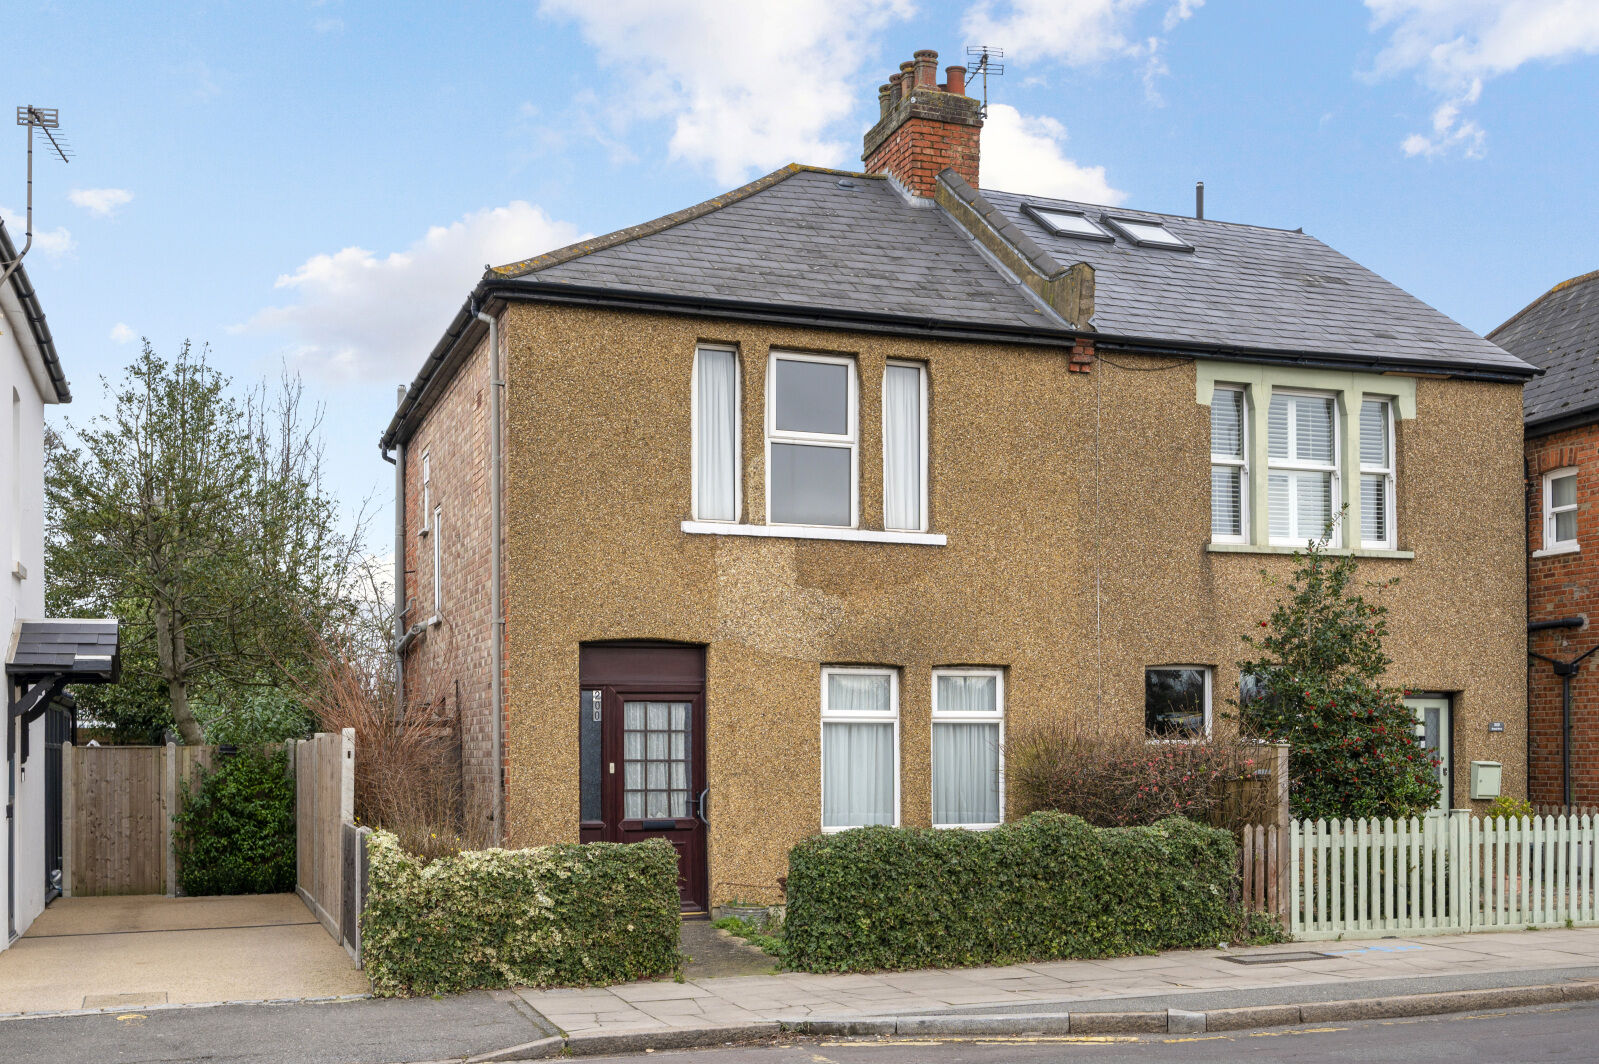 2 bedroom semi detached house for sale Grand Drive, Raynes Park, SW20, main image